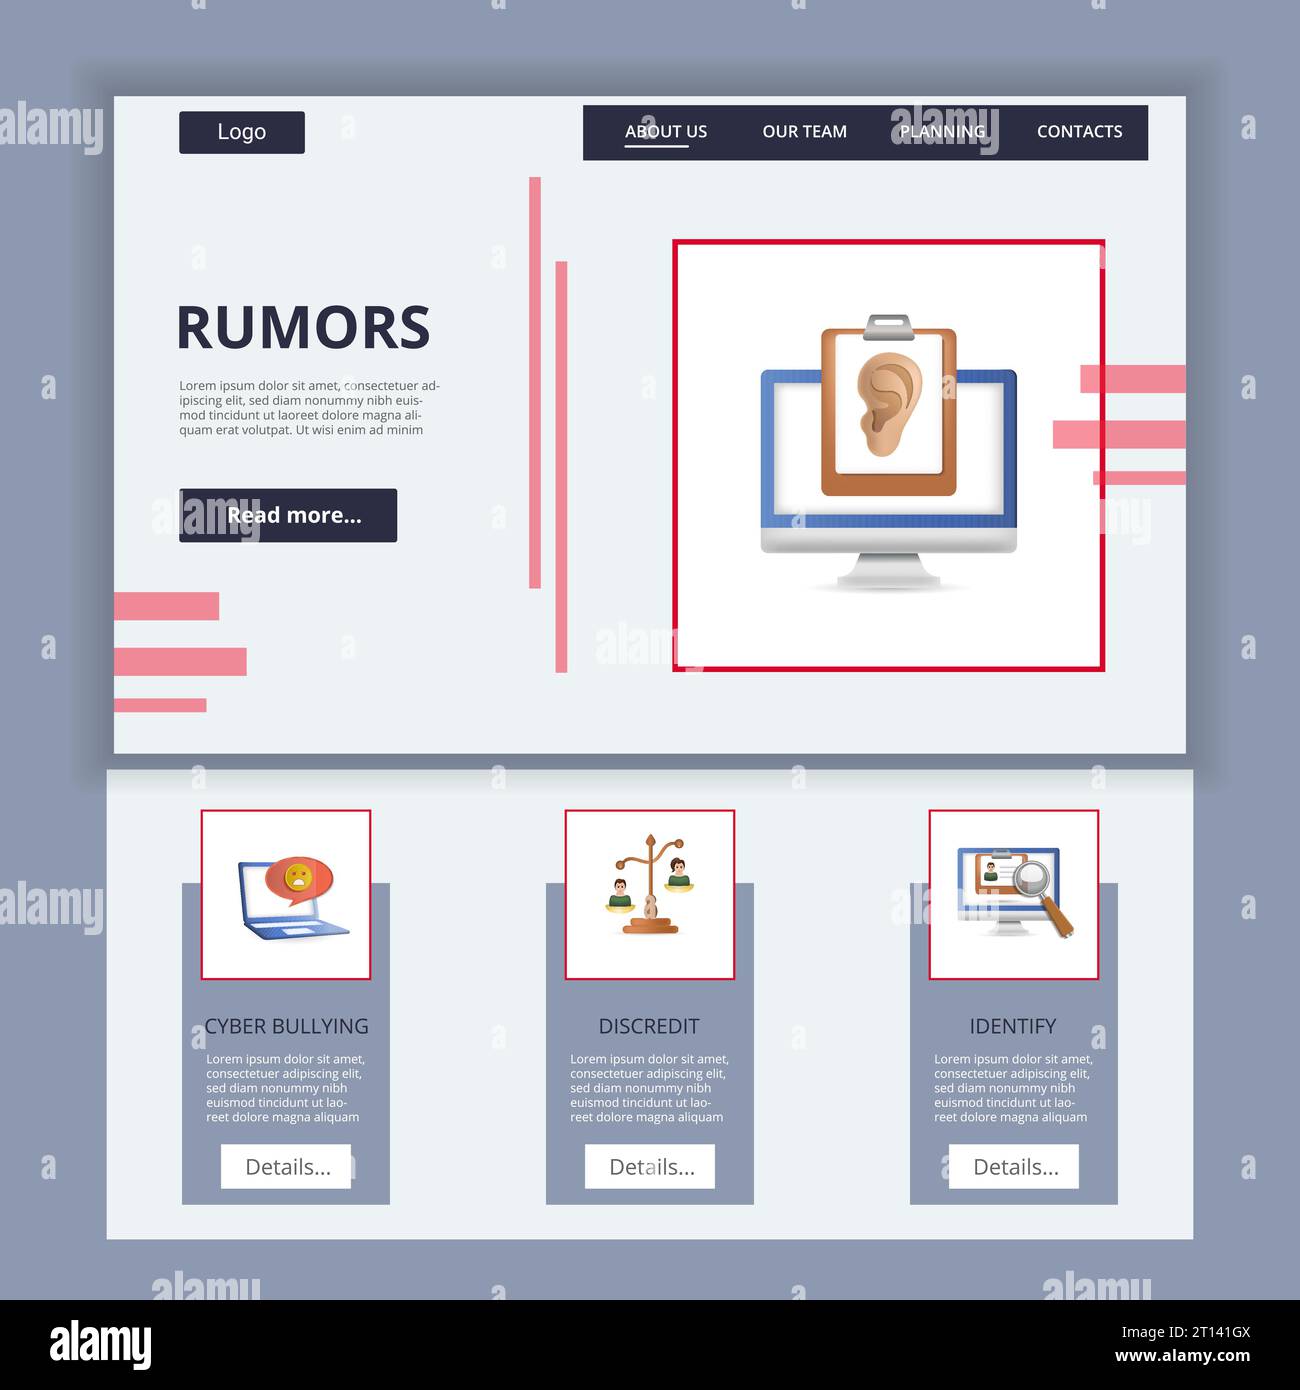 Rumors flat landing page website template. Cyber bullying, discredit, identify. Web banner with header, content and footer. Vector illustration. Stock Vector